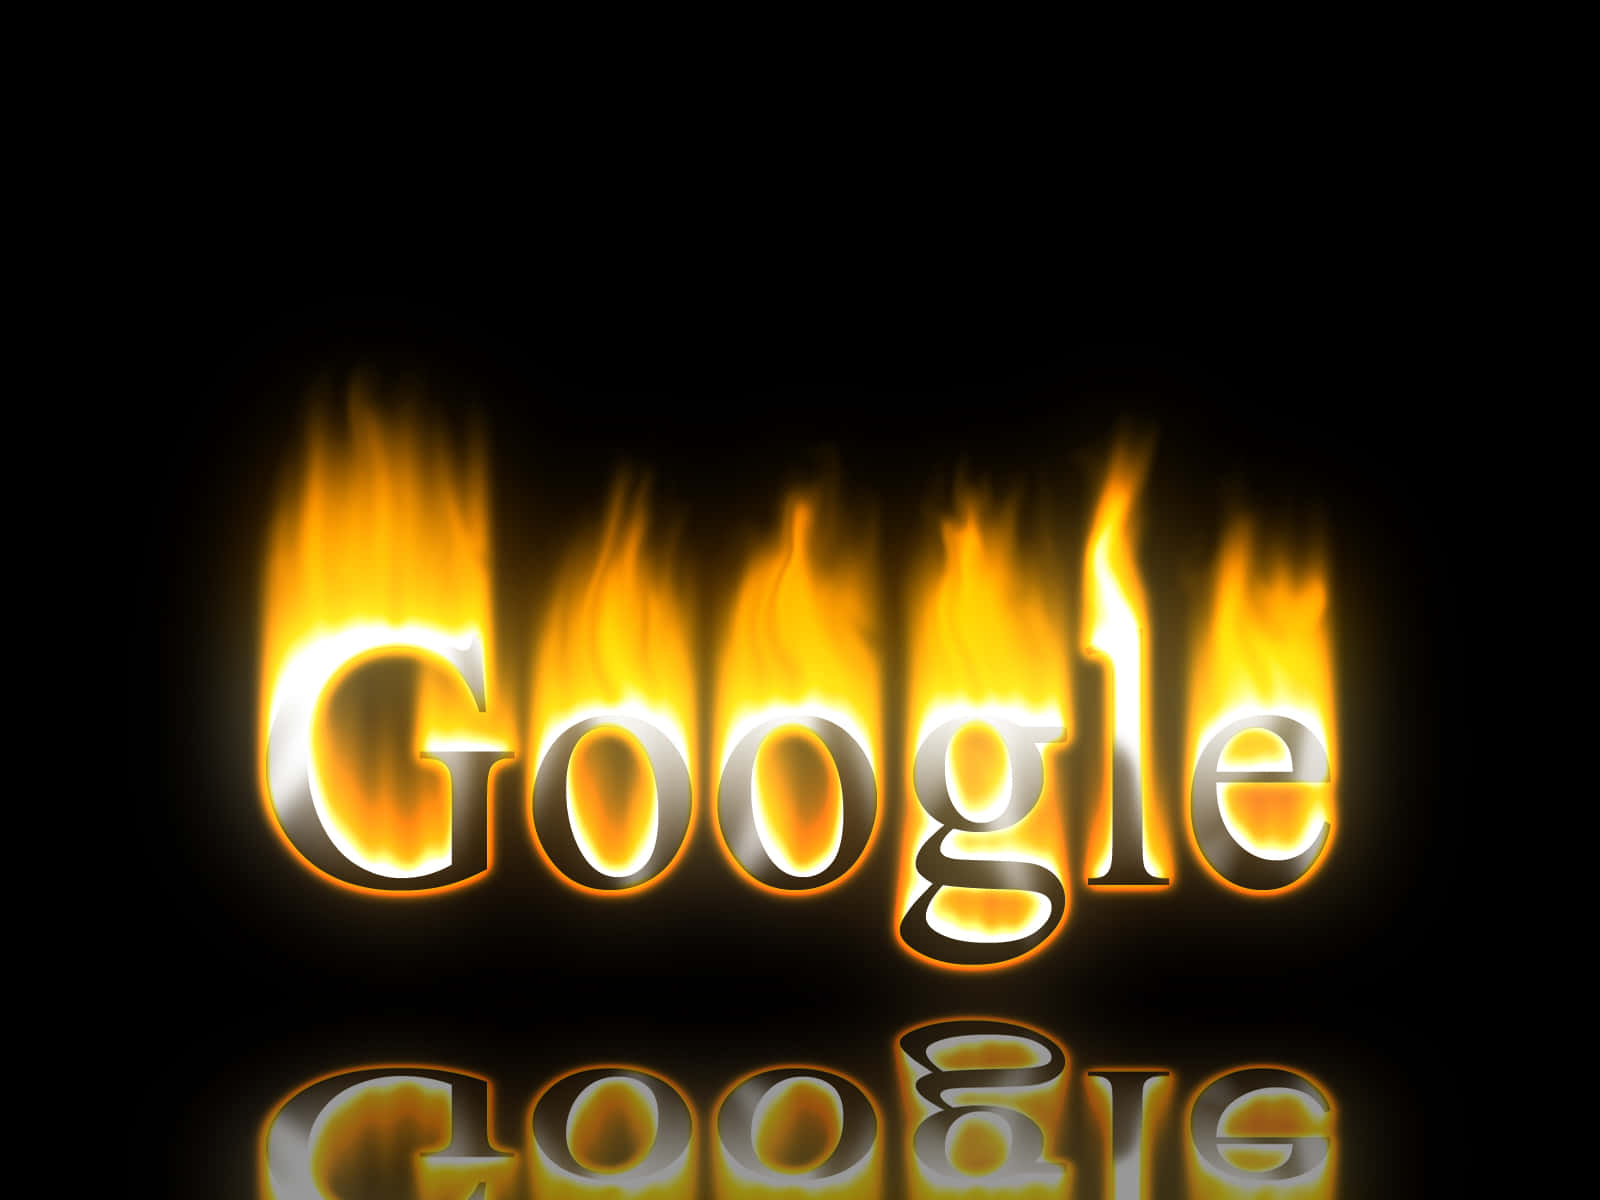 Get the Best from Google Wallpaper